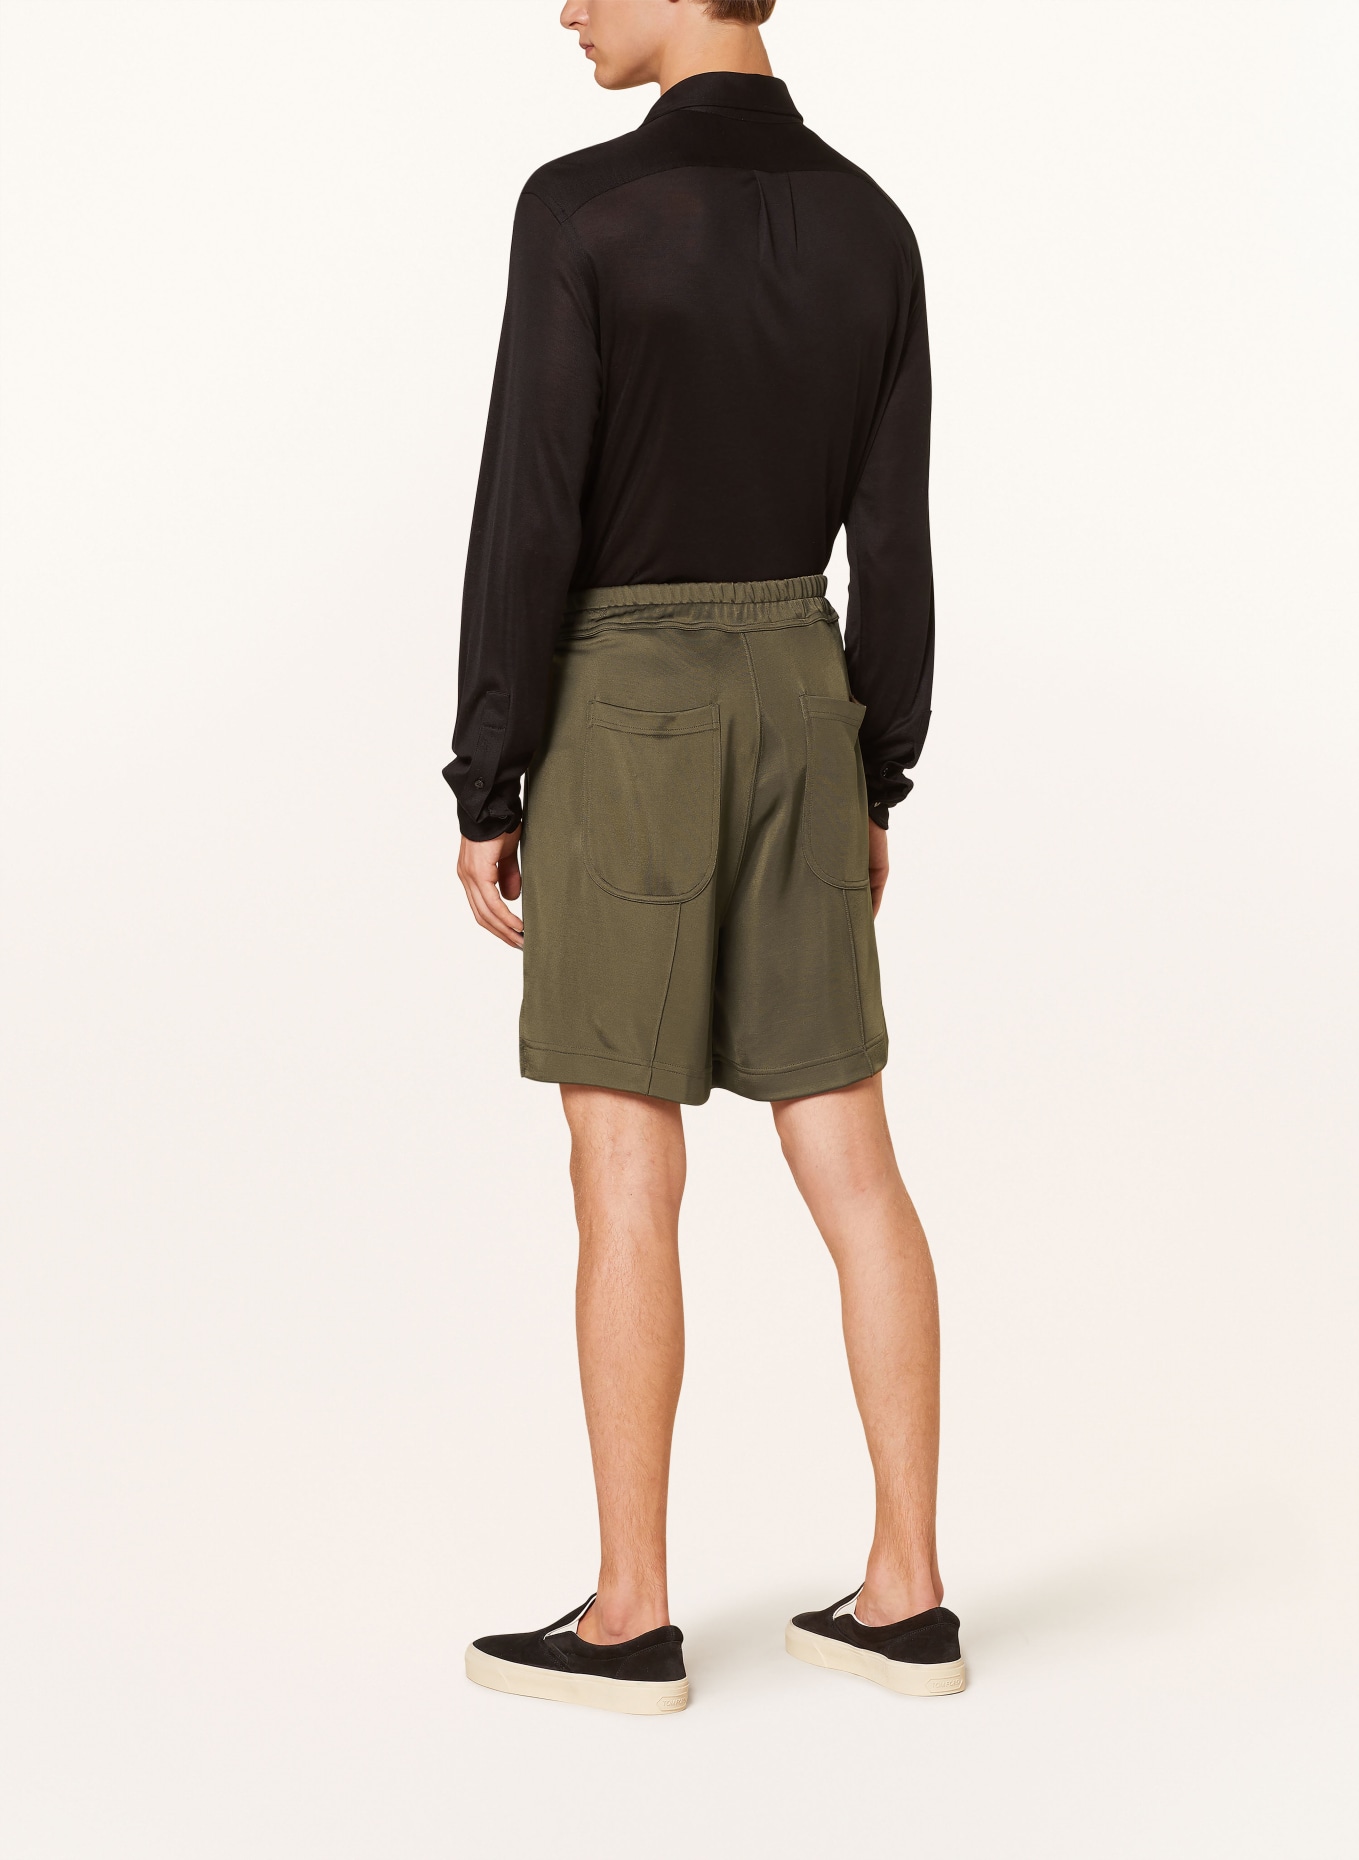 TOM FORD Shorts in jogger style, Color: KHAKI (Image 3)